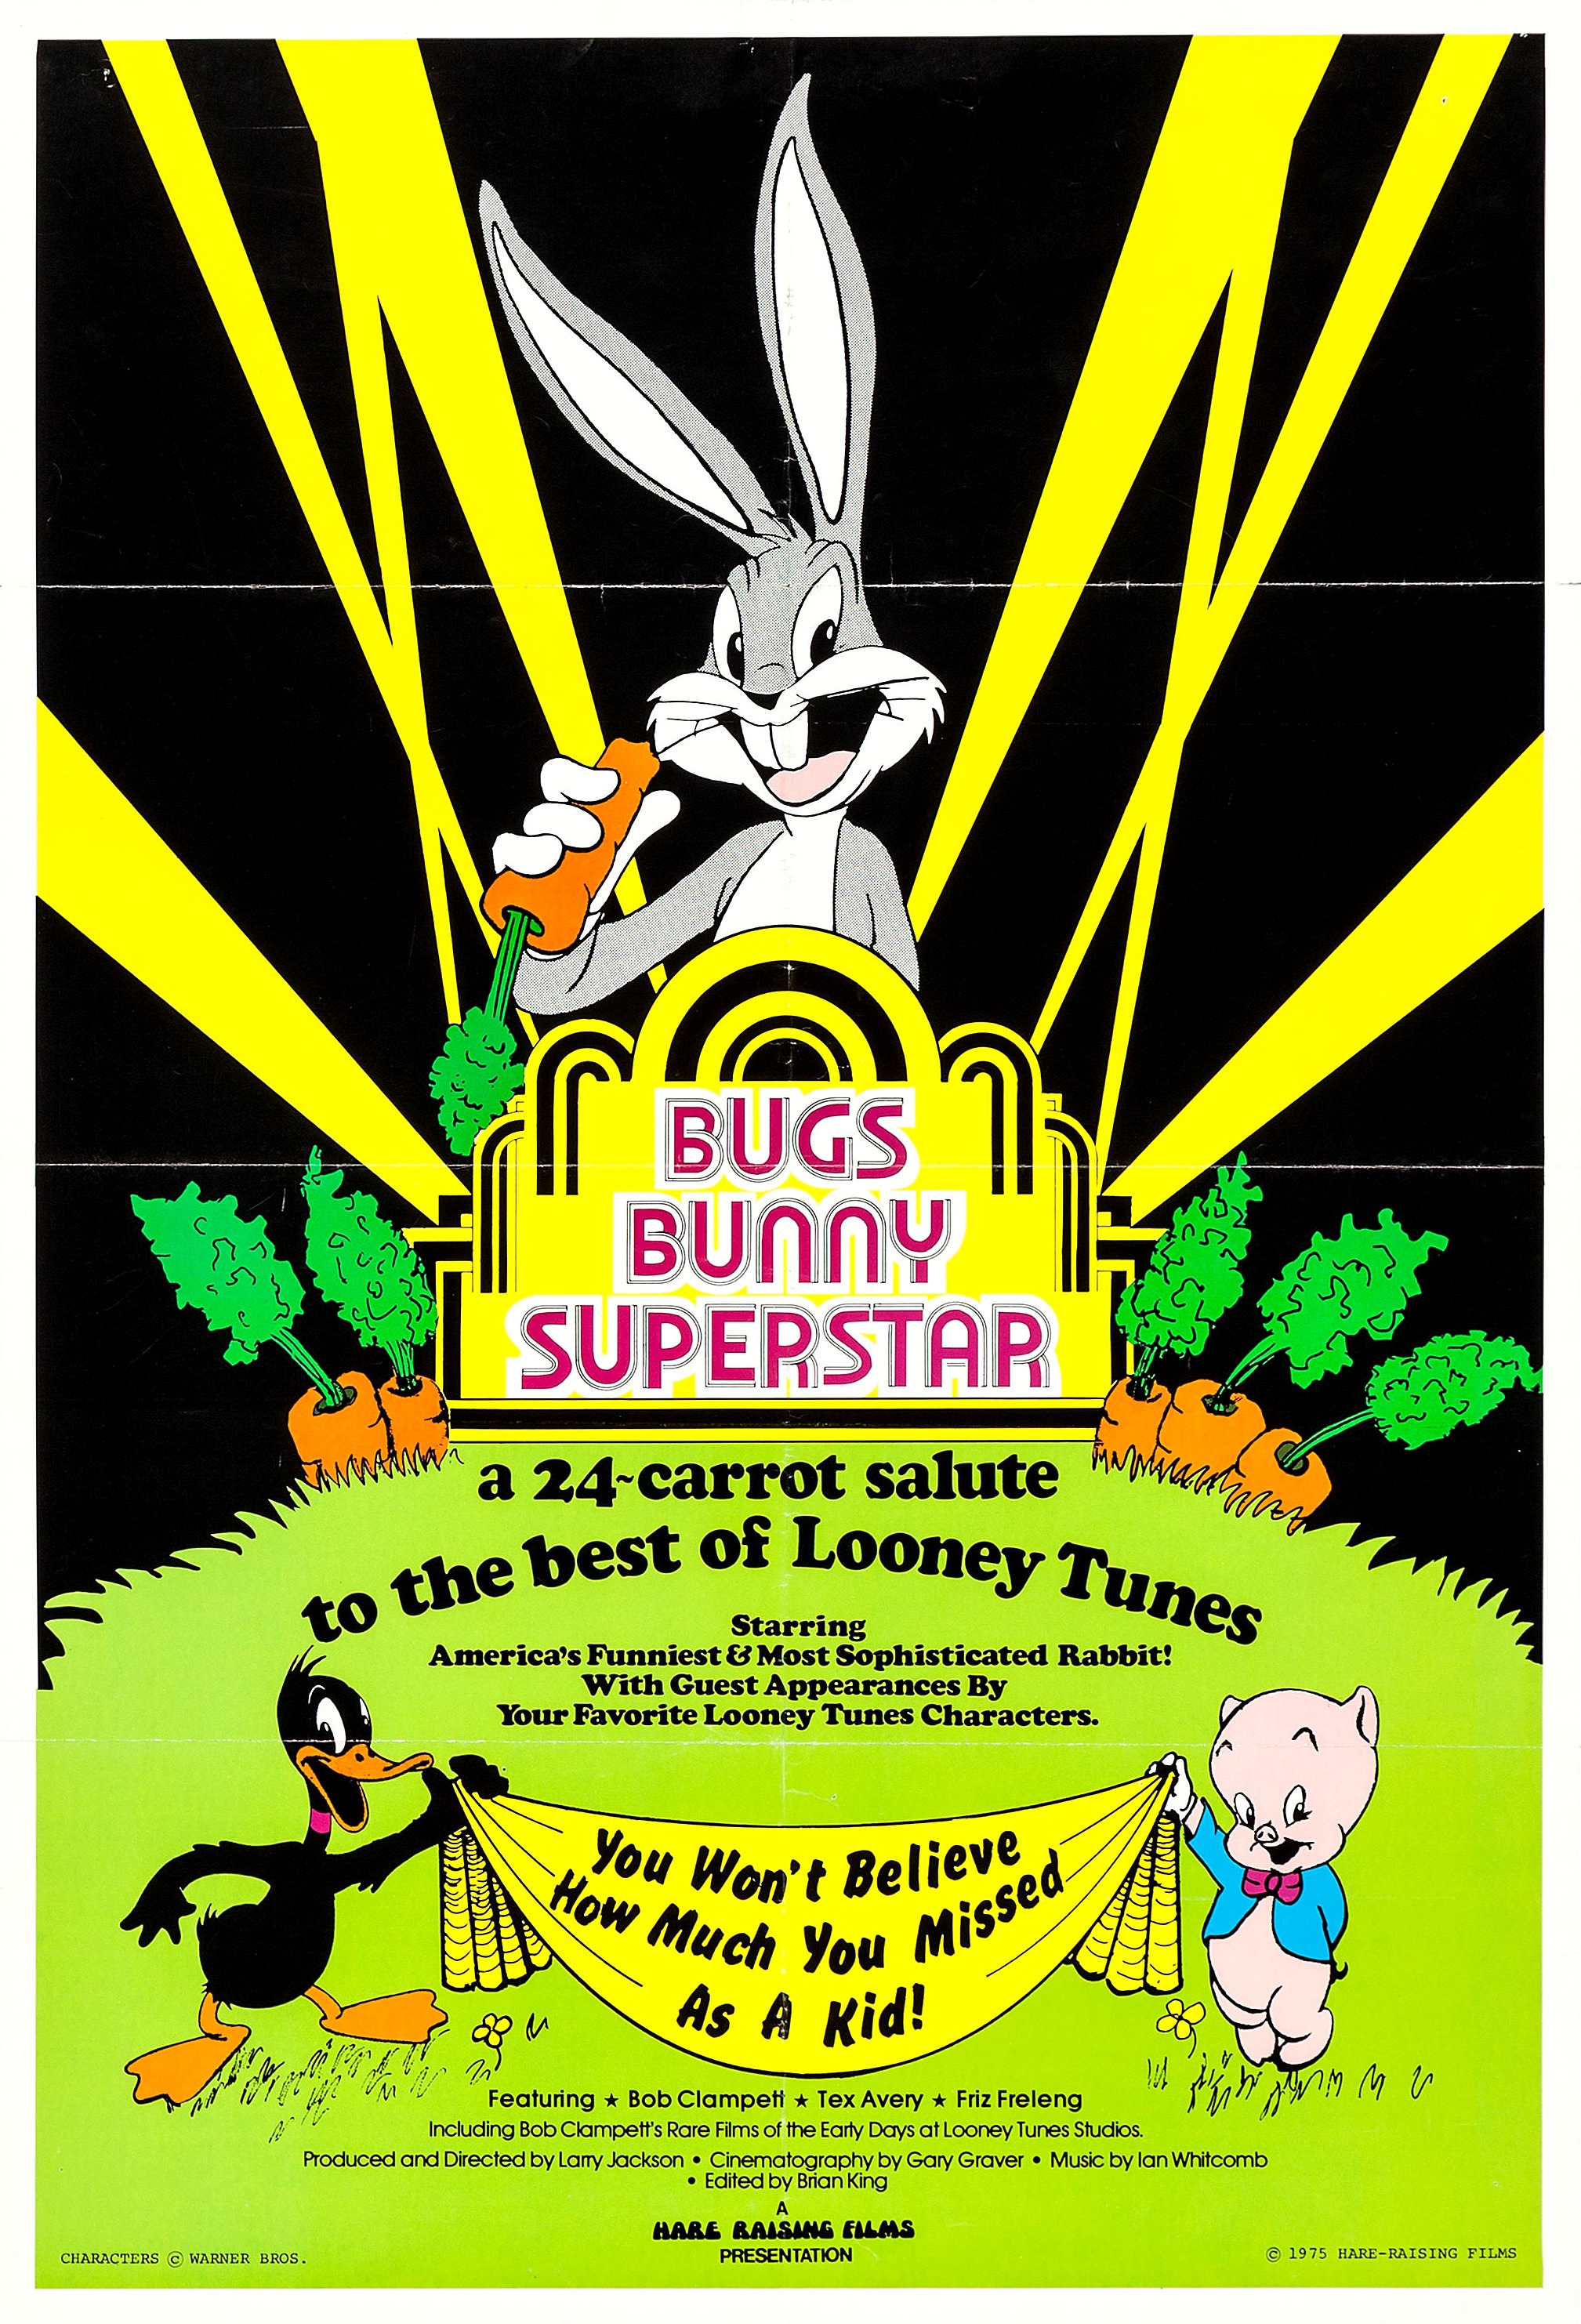 Mega Sized Movie Poster Image for Bugs Bunny Superstar 